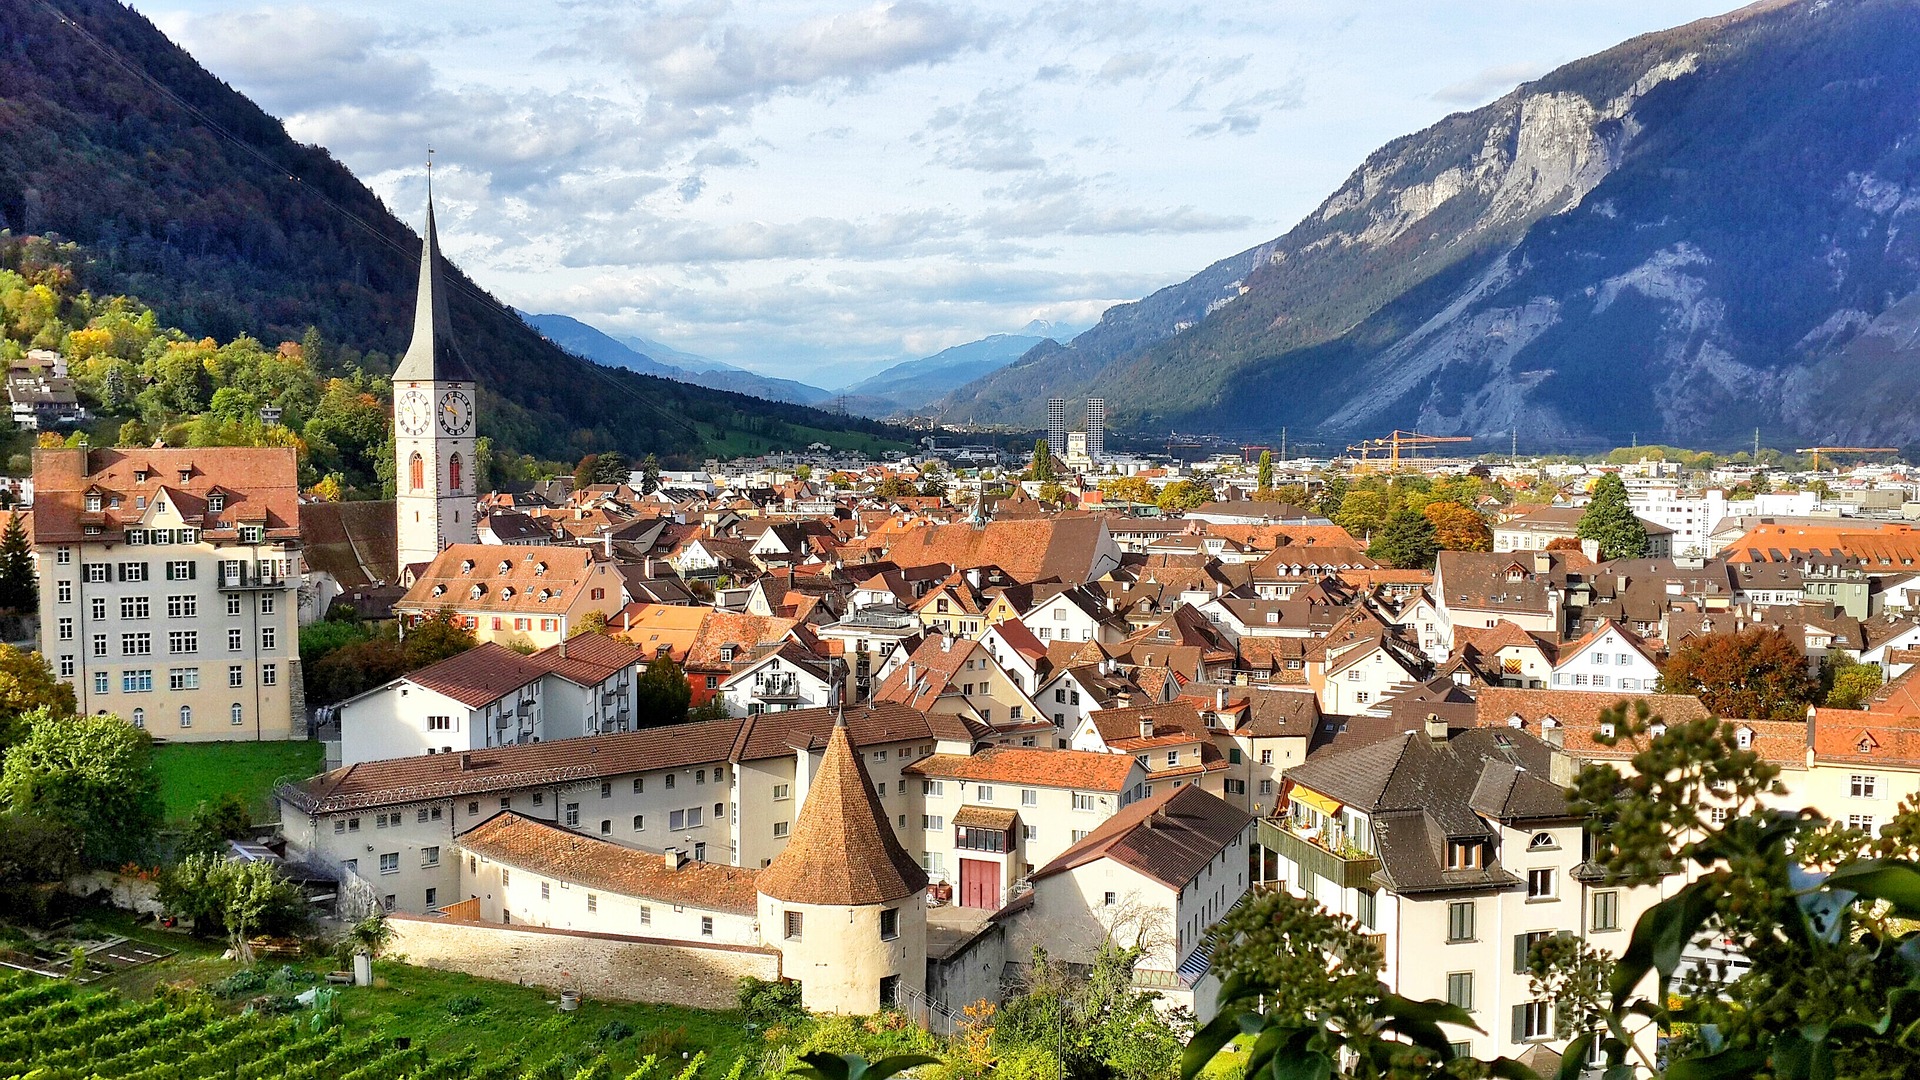 Learn all about the history of Chur, the oldest town in Switzerland